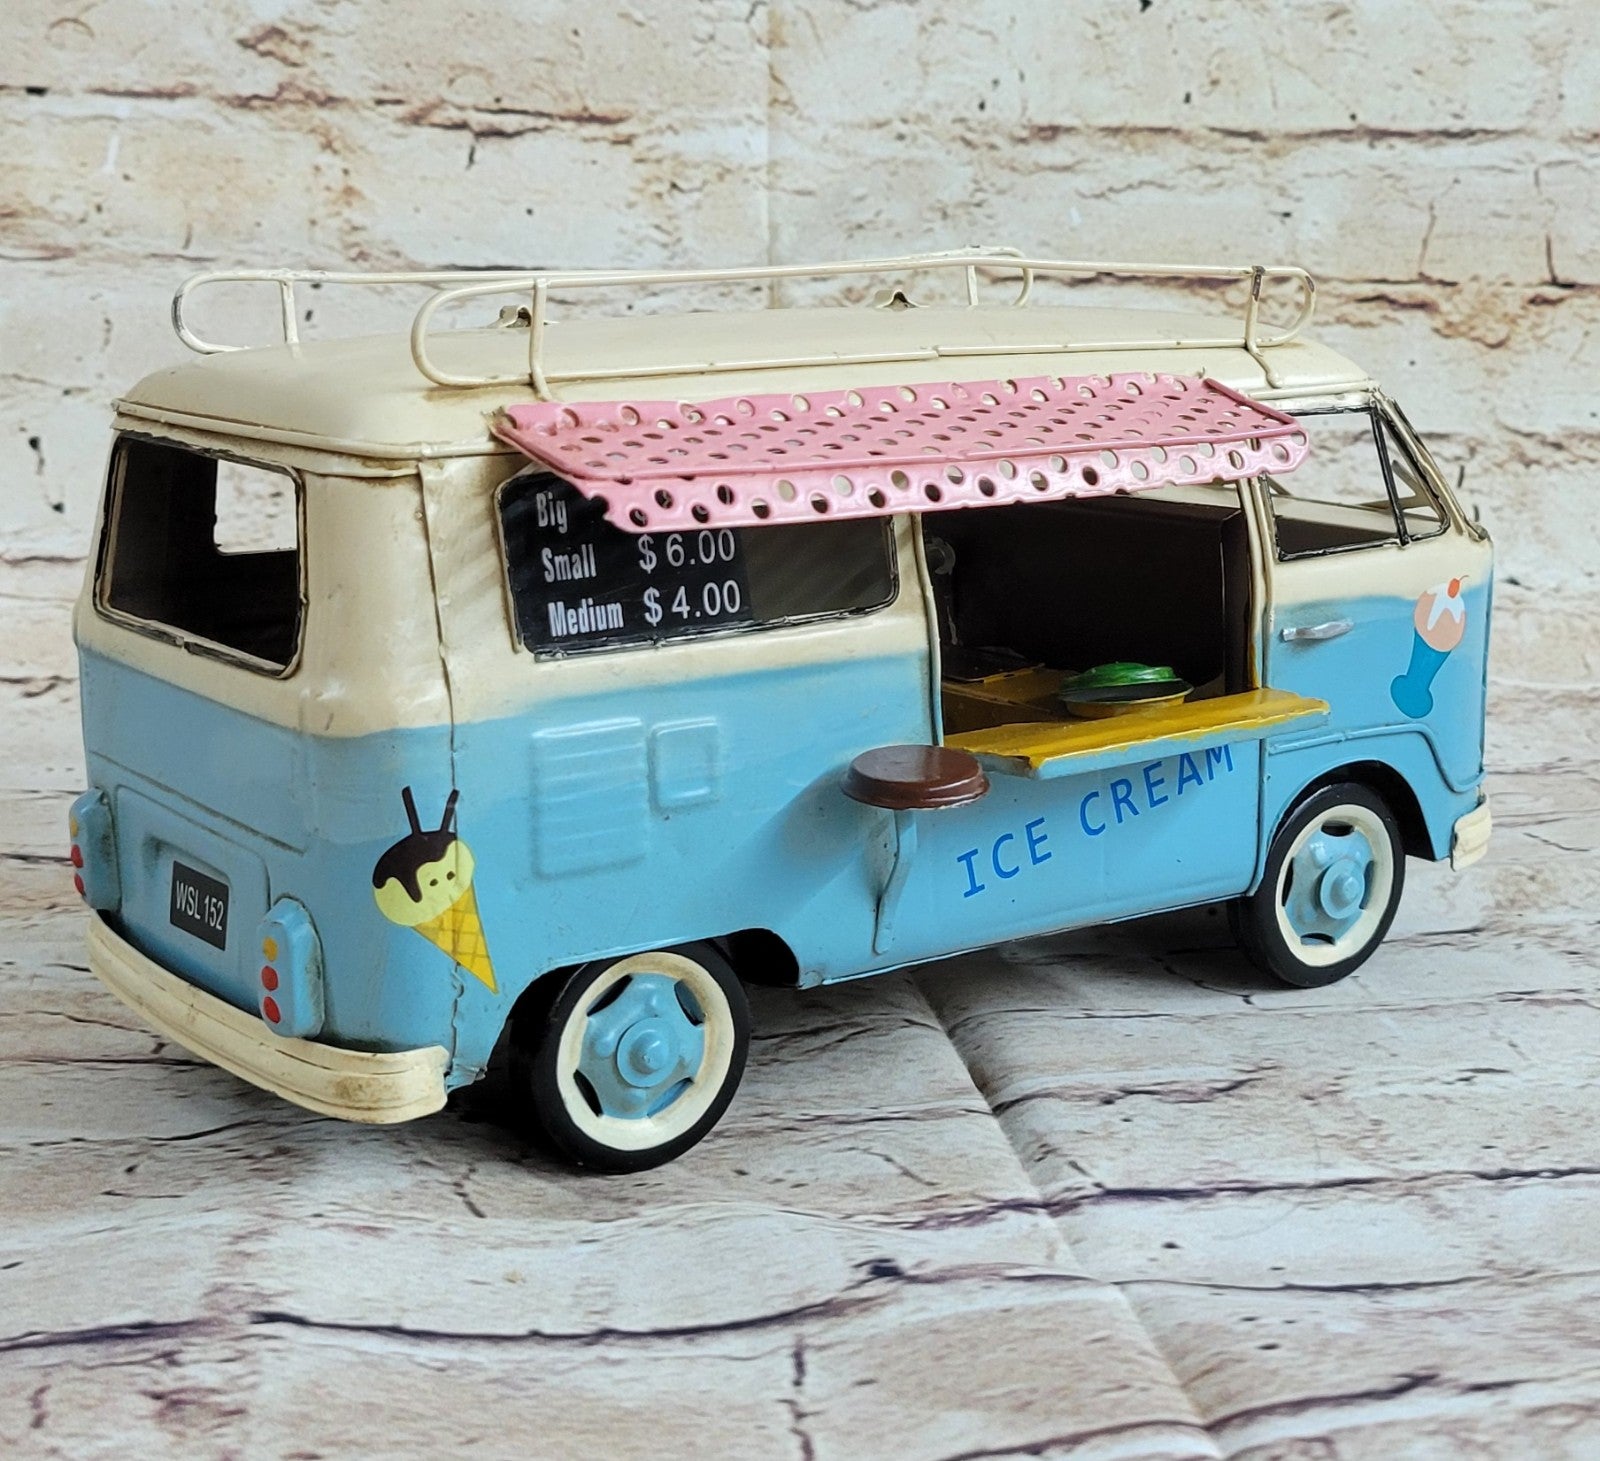 Fast Food Ice Cream Truck 1:18 Scale Car Model Diecast Gift Toy Vehicle Adult